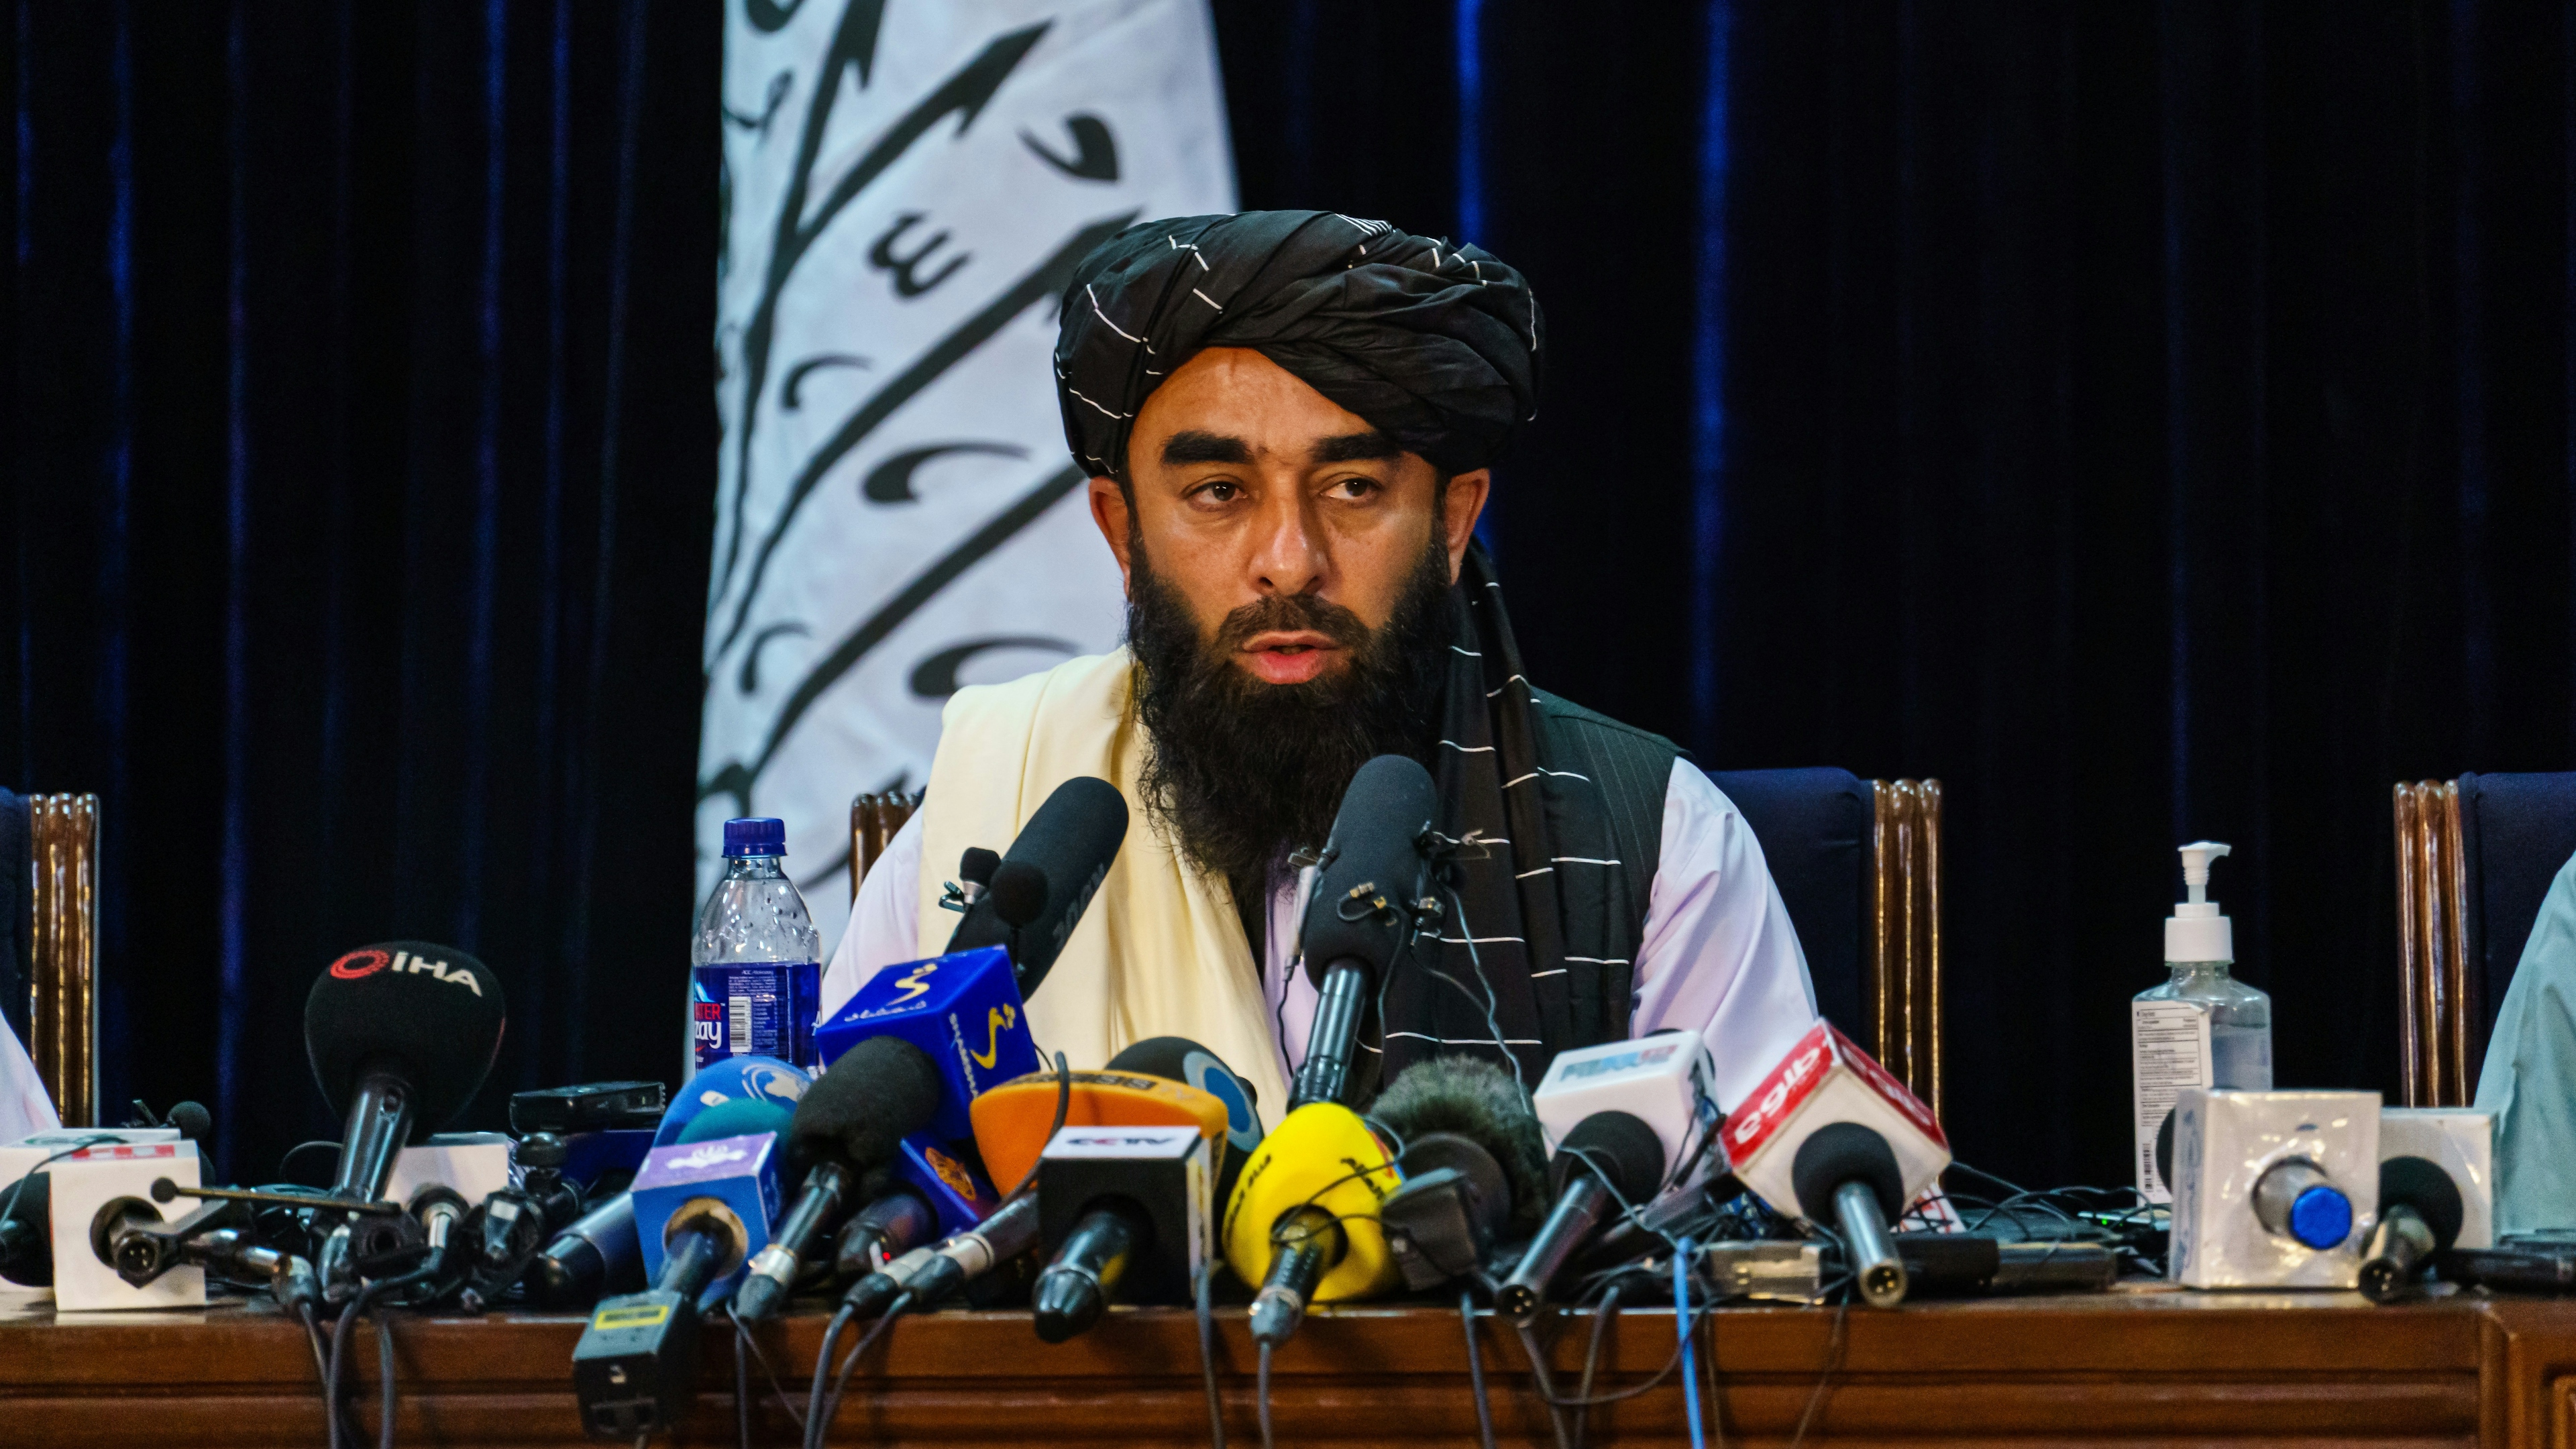  Zabihullah Mujahid, the Taliban spokesman for nearly 2 decades who worked in the shadows, makes his first-ever public appearance to address concerns about the Taliban' reputation